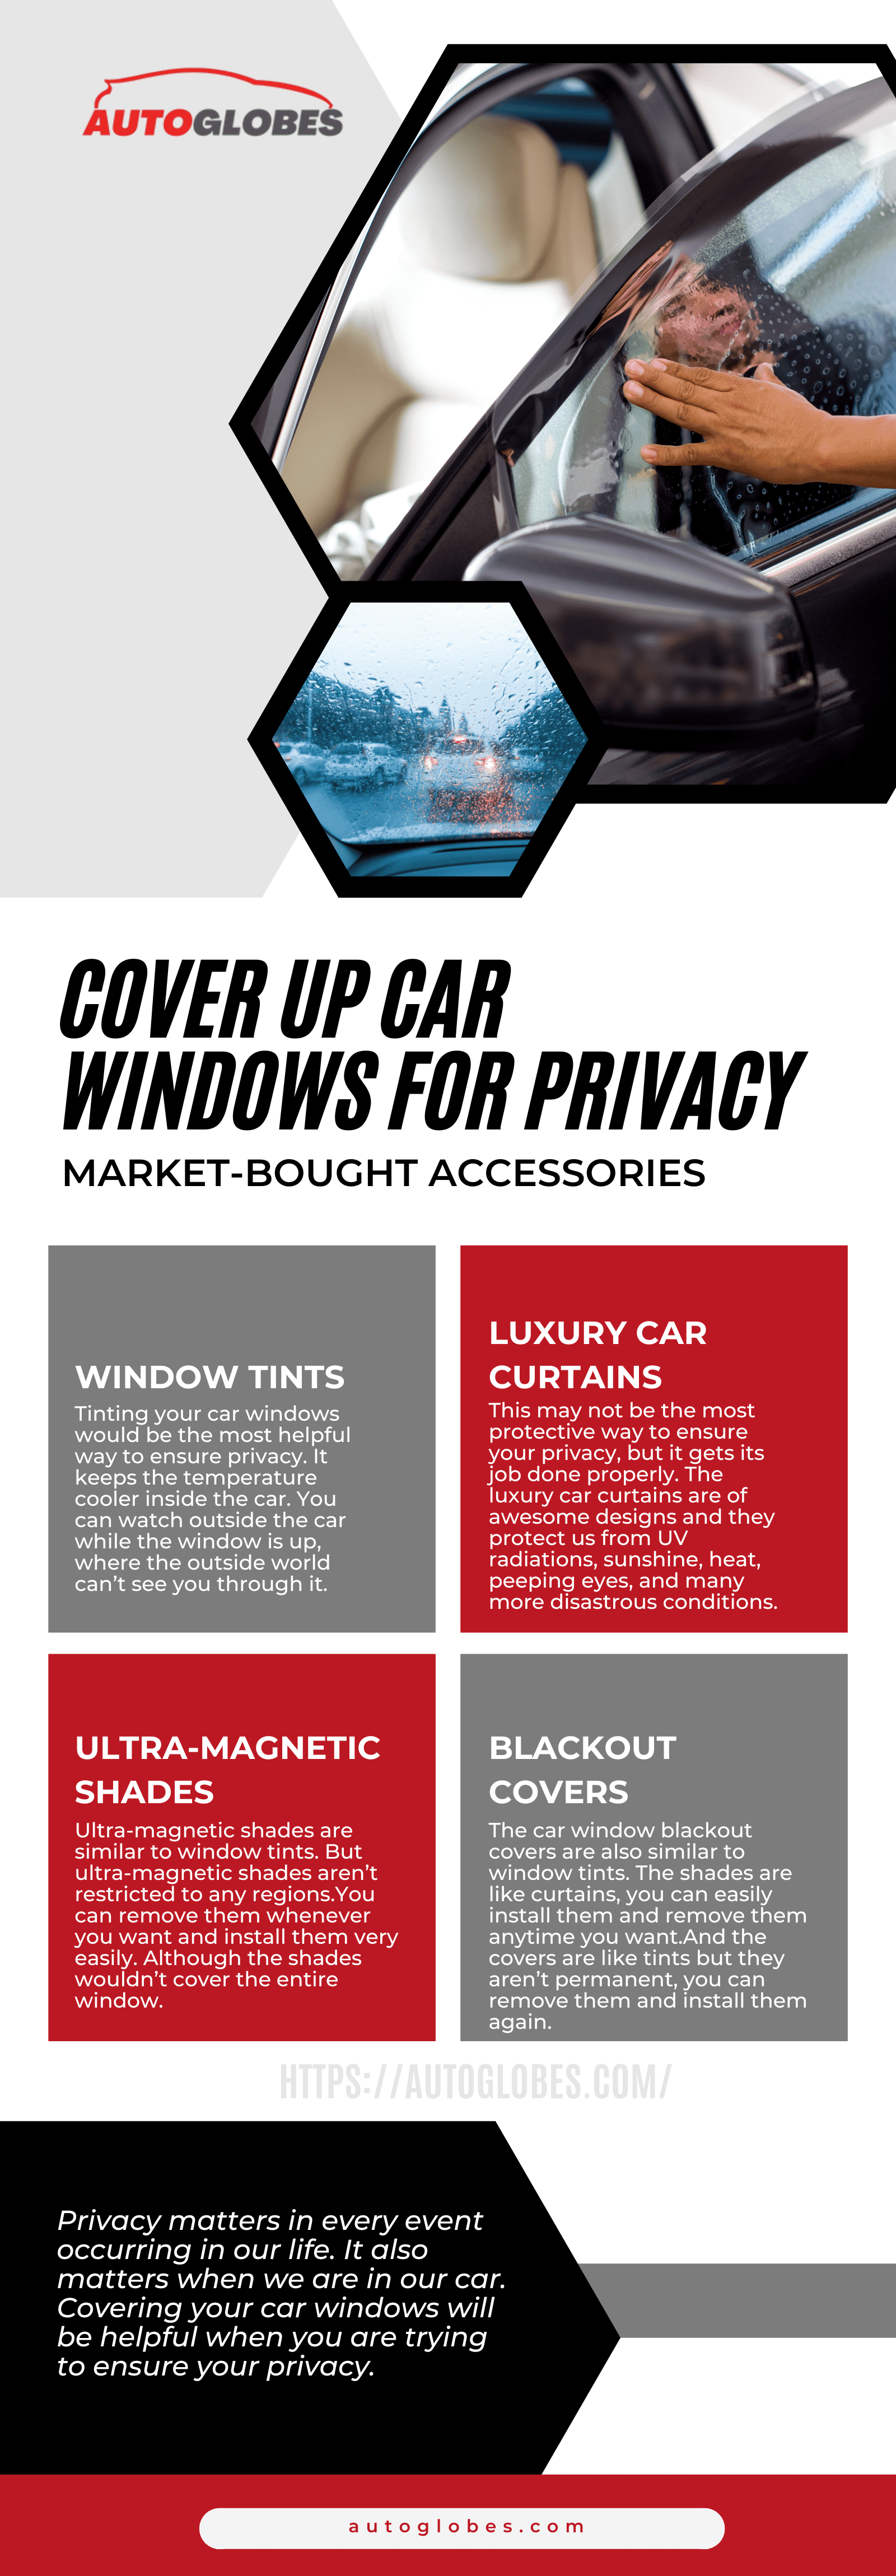 Cover up car windows for privacy infographic